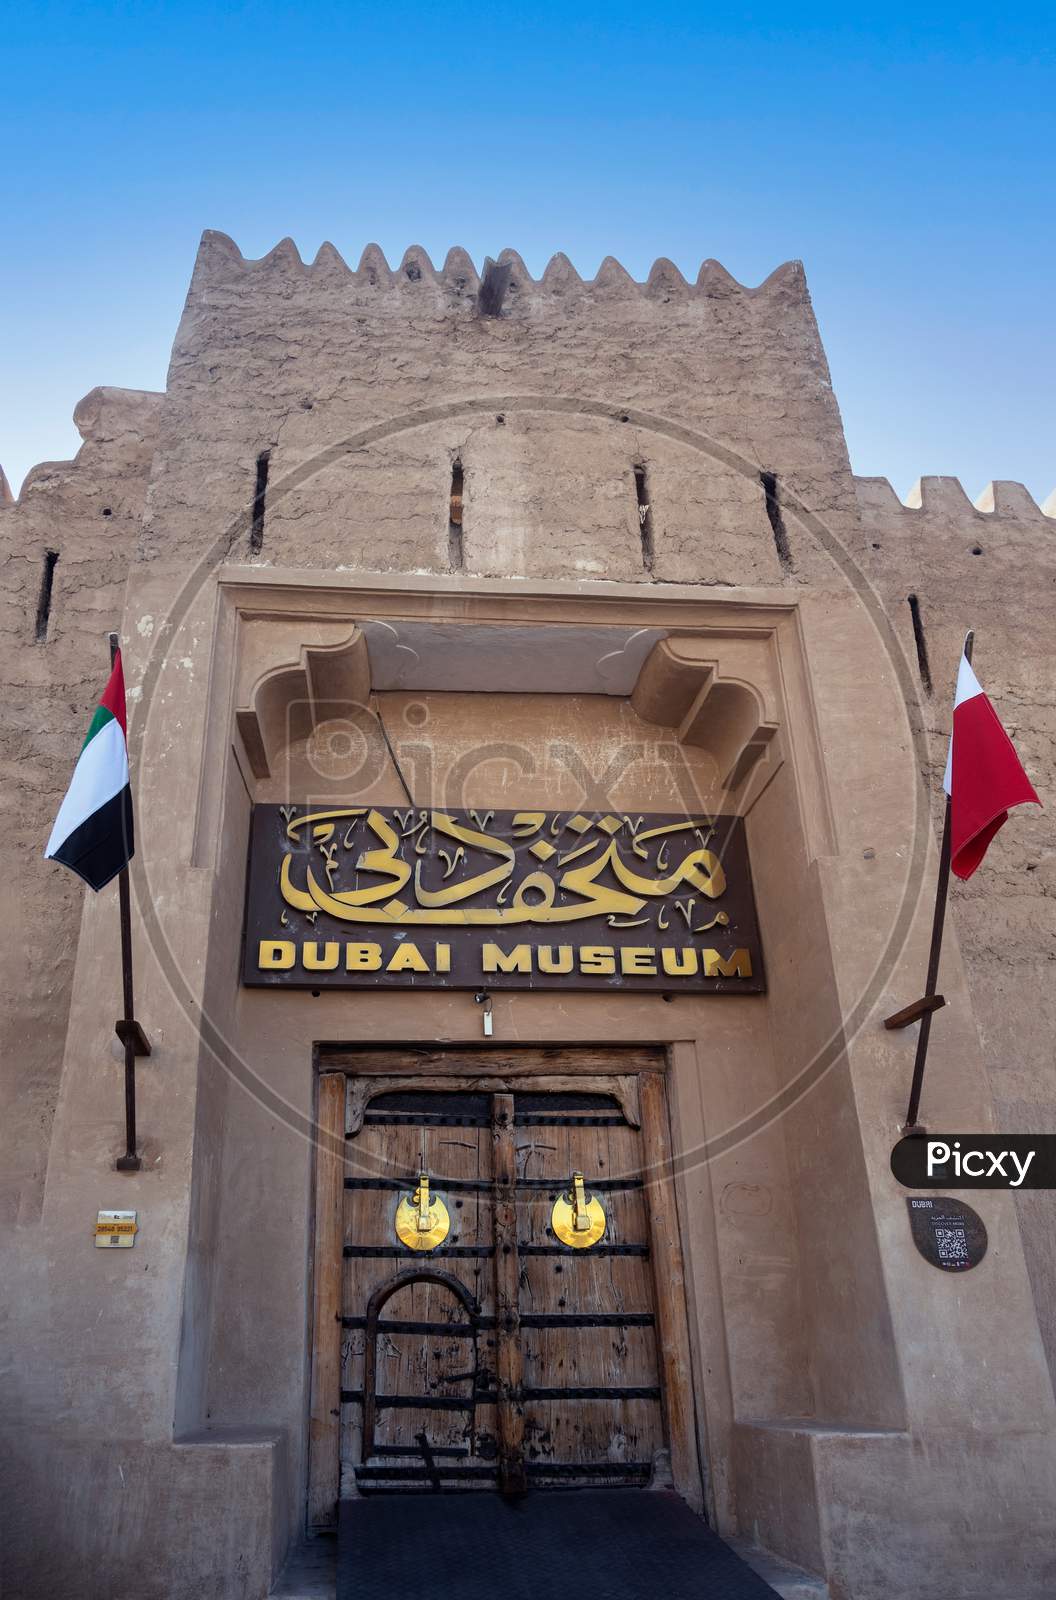 Feb 27Th, 2021, Bur Dubai, Uae. View Of The Old Vintage Door And Signboard At The Entrance To The Museum Of Dubai Uae Captured At Bur Dubai, Uae.